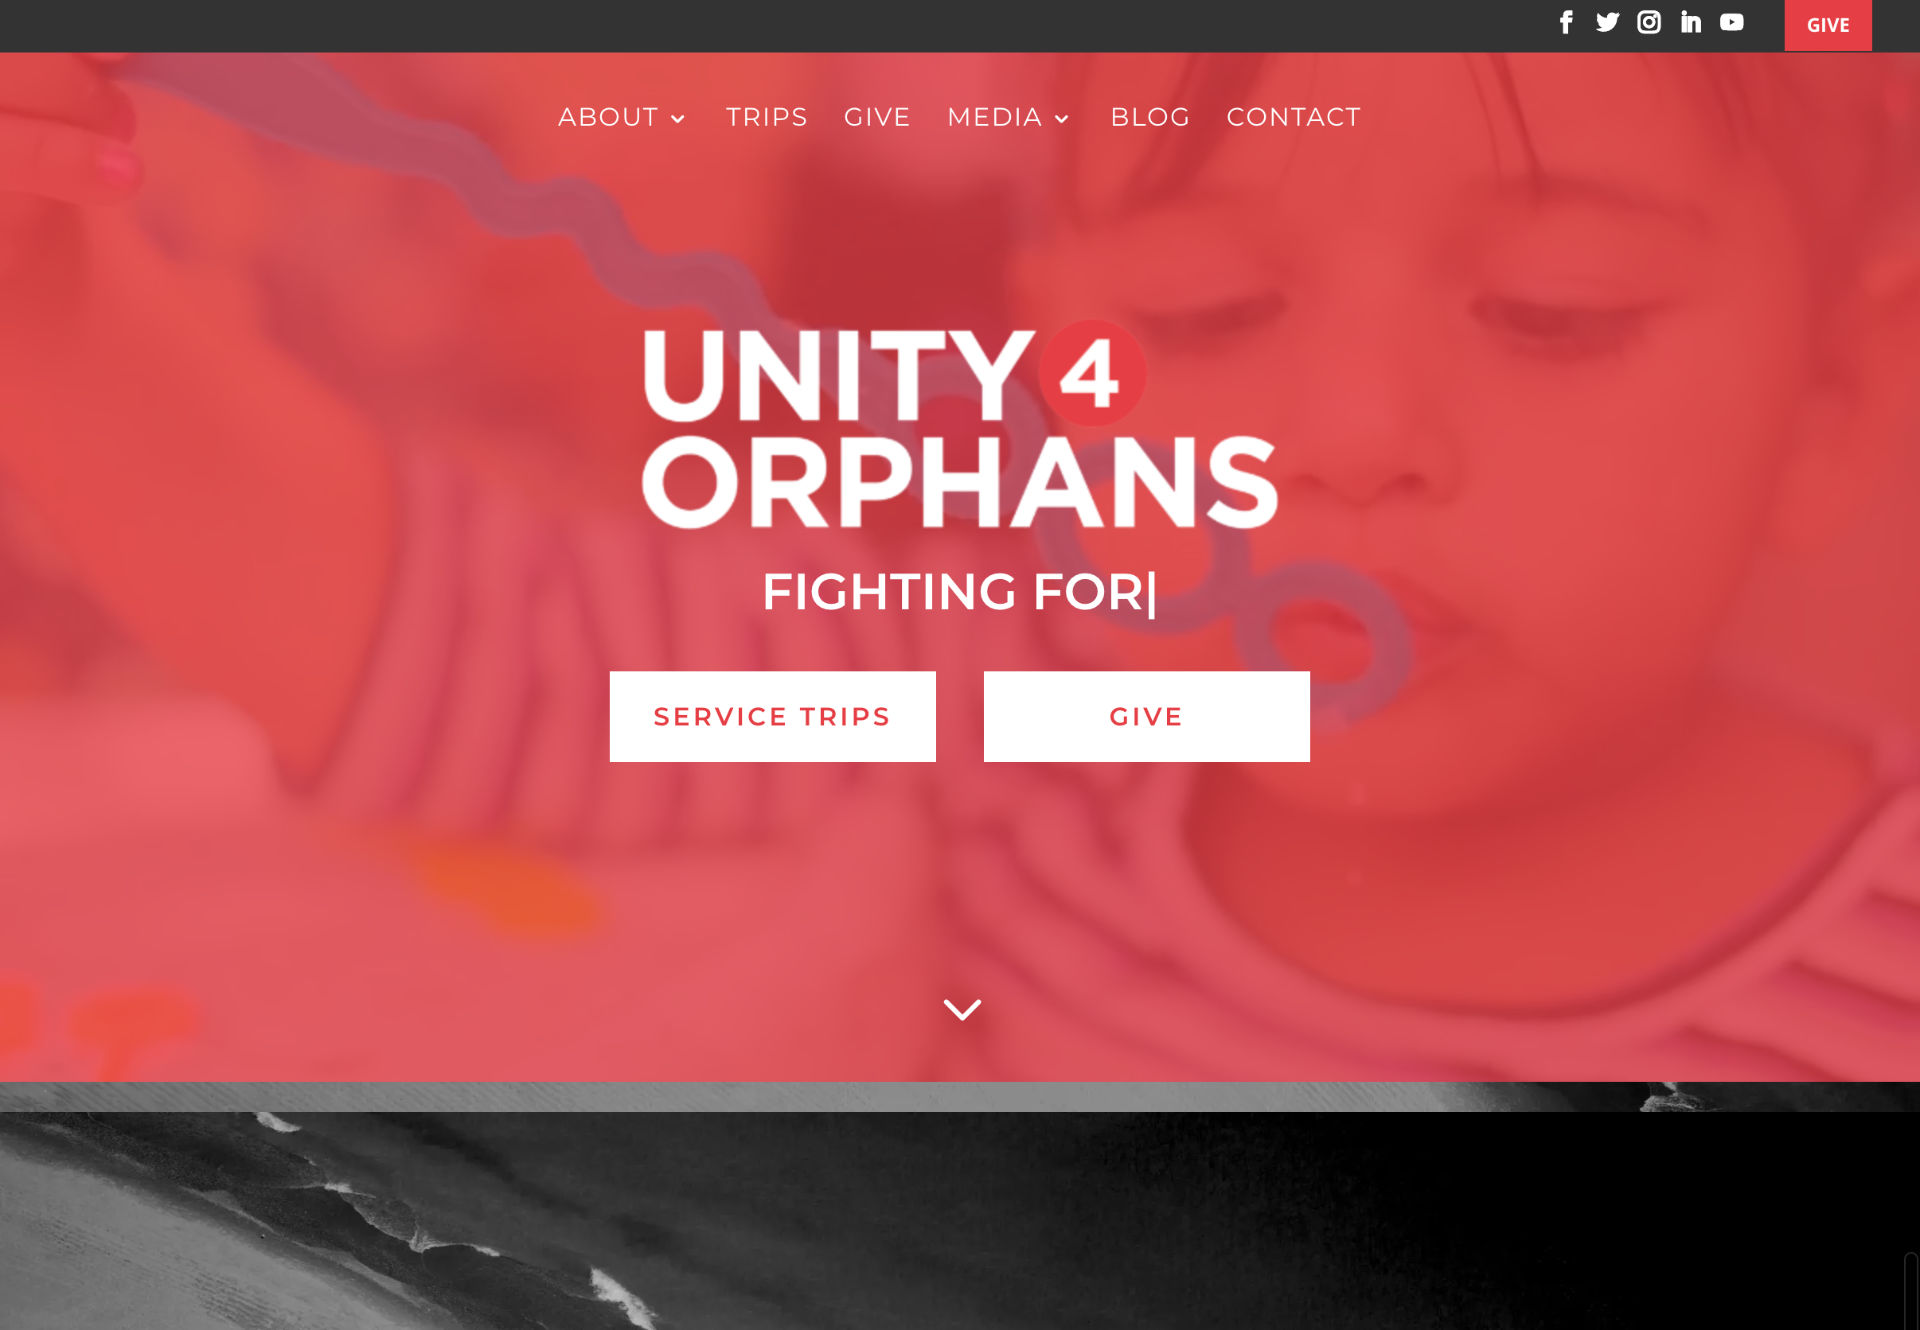 Unity 4 Orphans U4O Fighting for a Brighter Future (2)